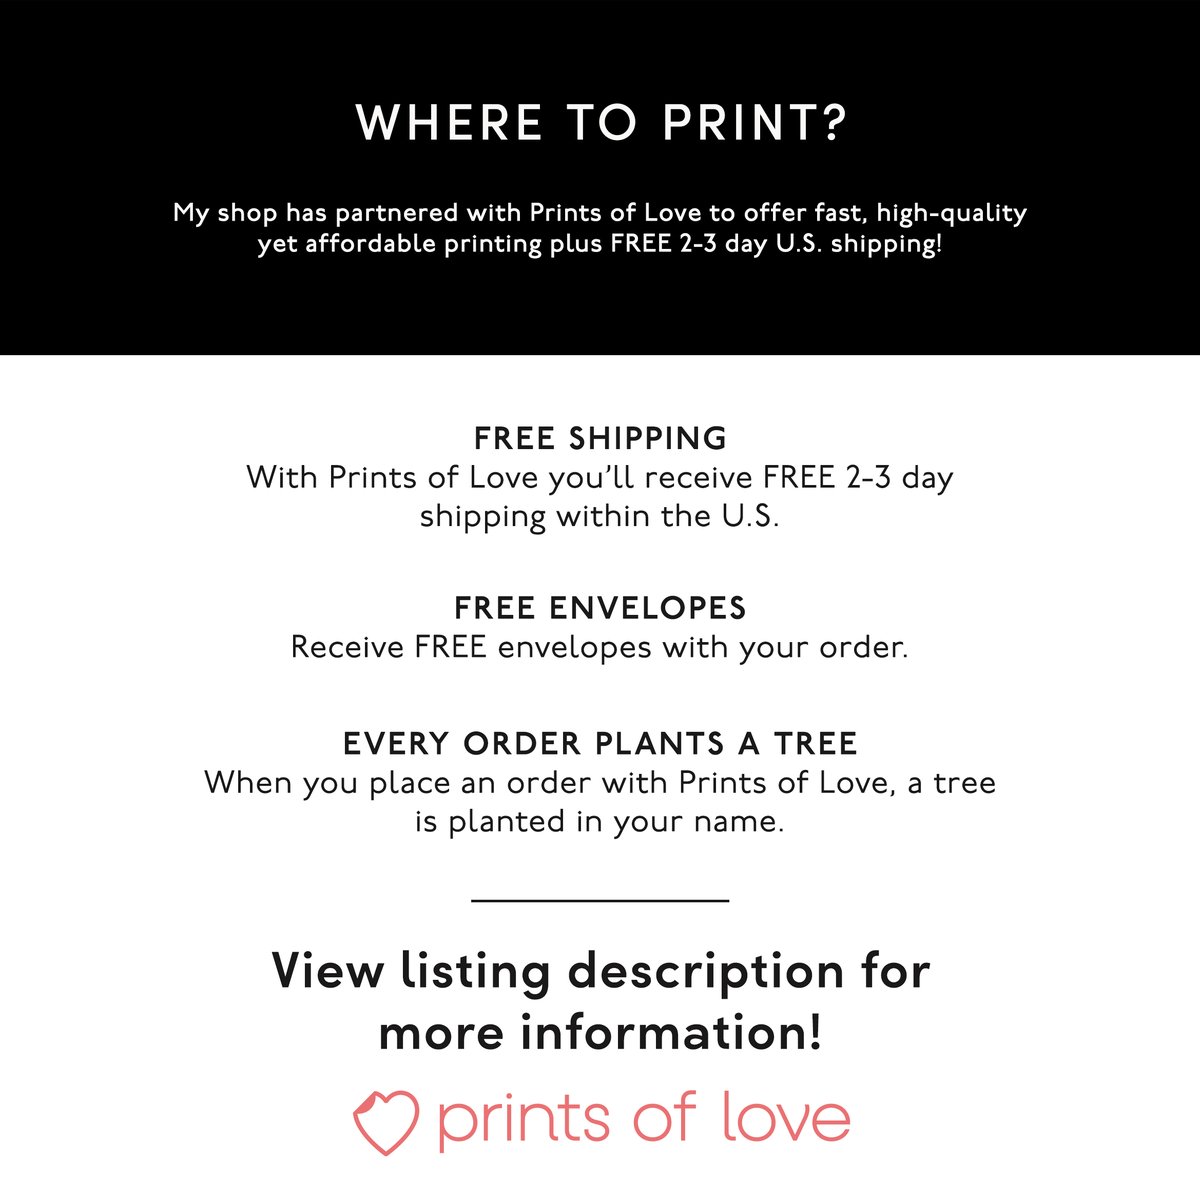 Printing made simple. Prints Of Love online print shop takes the hassle out of printing your designs. Simply upload the file(s), and your prints will ship for free in no time. printsoflove.com/ref/STSPrintab…